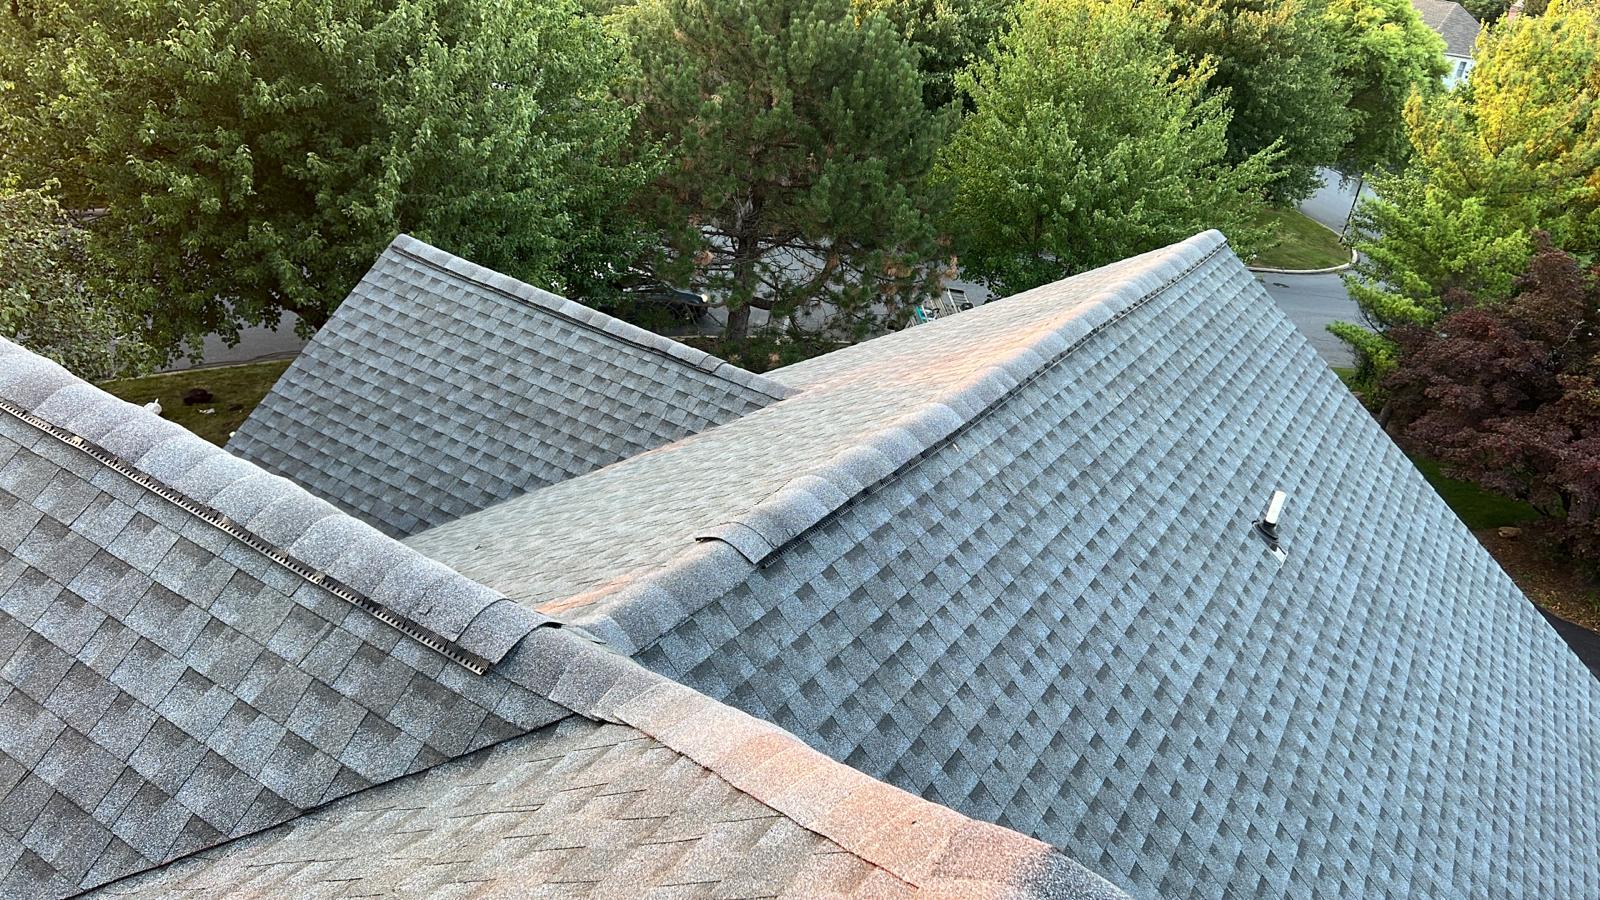 New shingle roof with peaks.